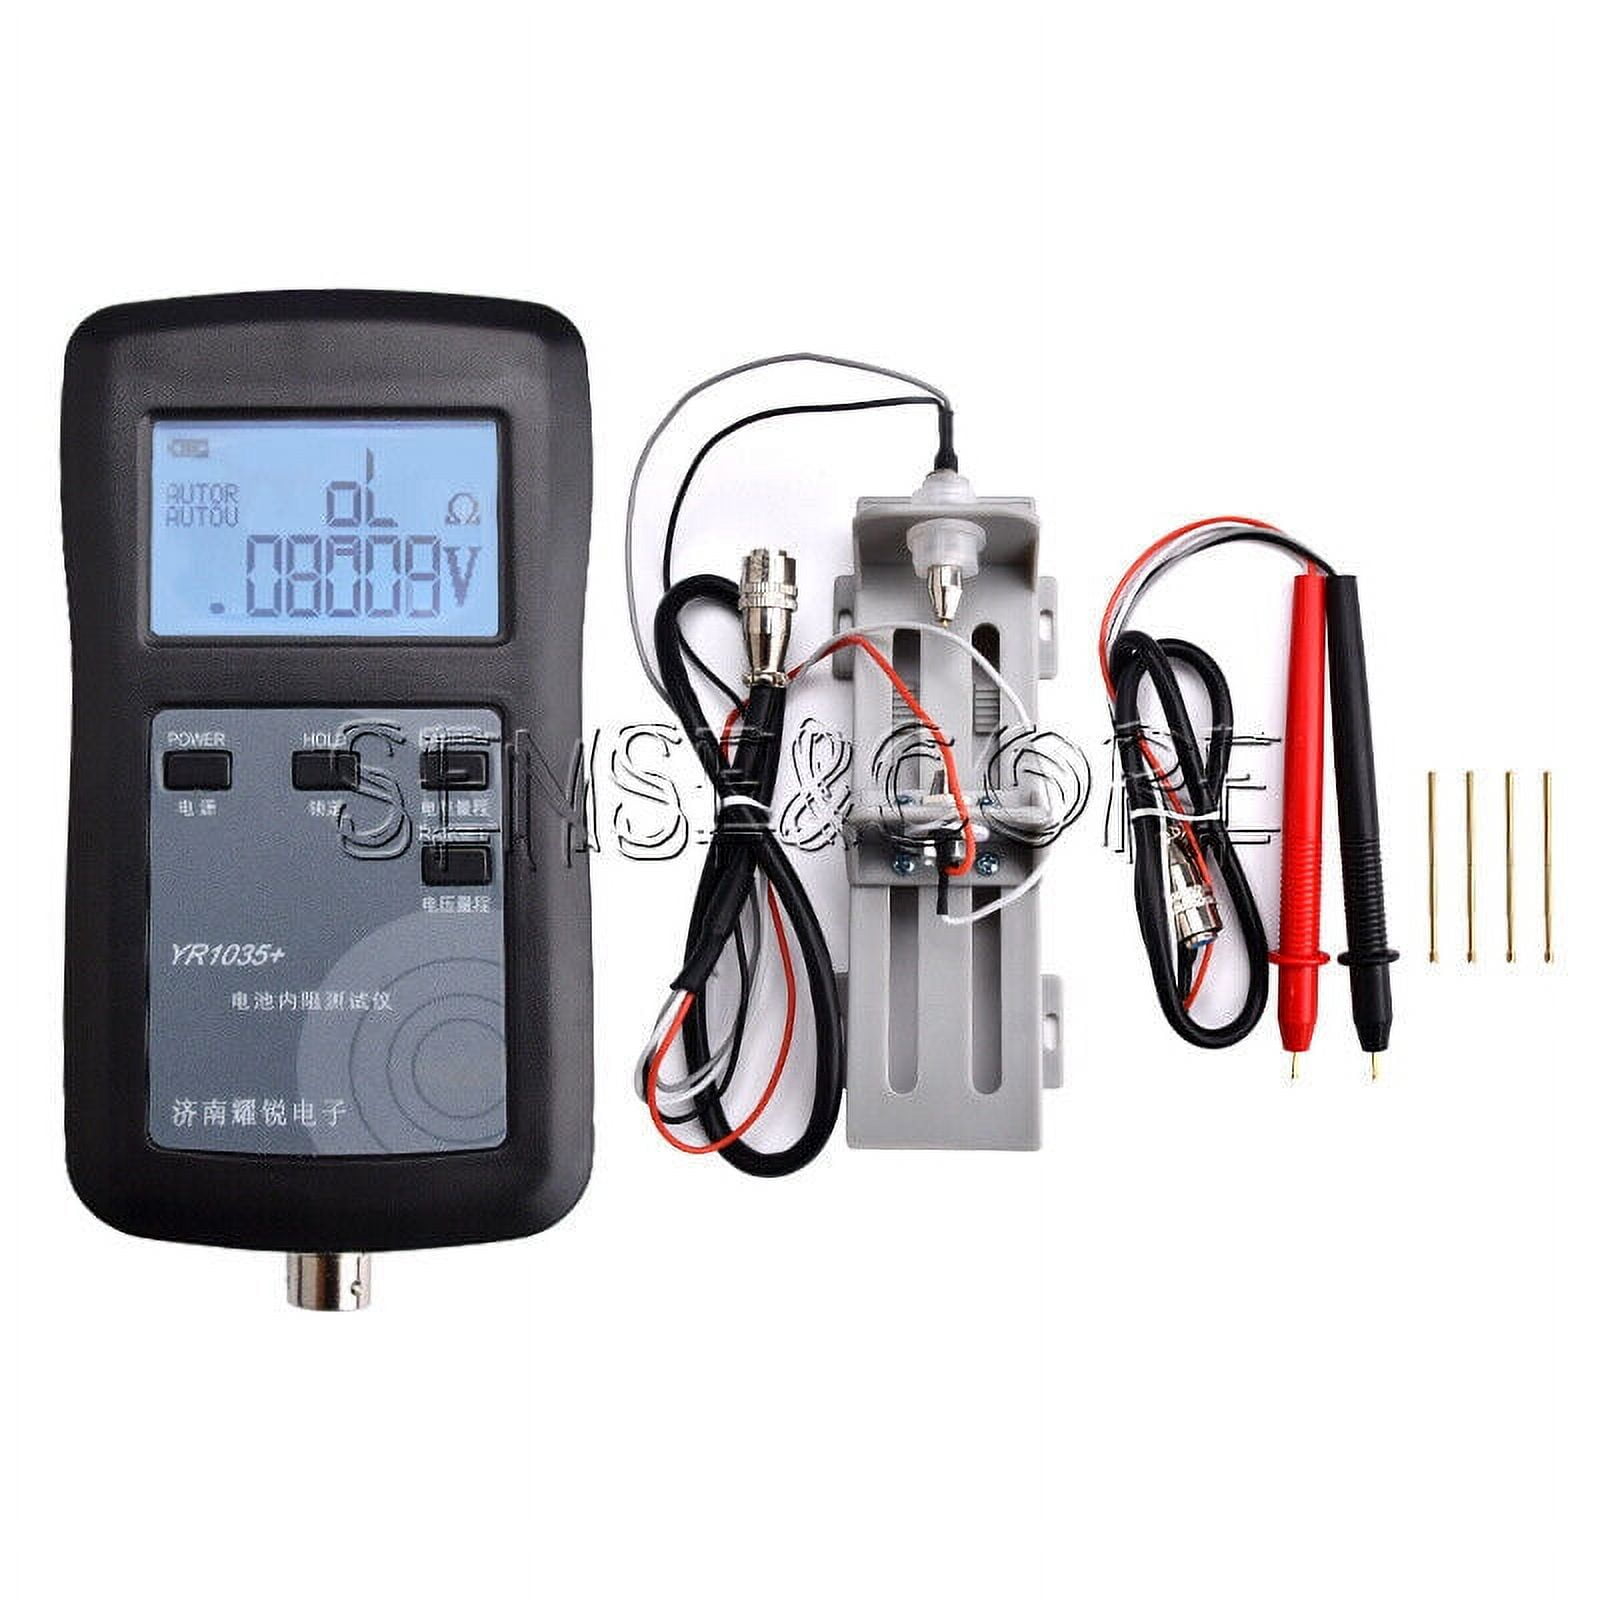 Battery Internal Resistance Tester DIY Lithium Battery High-Precision YR1030  YR1035 Upgrade18650 Battery Testing Combination 2 - Price history & Review, AliExpress Seller - Fossi Tool Store